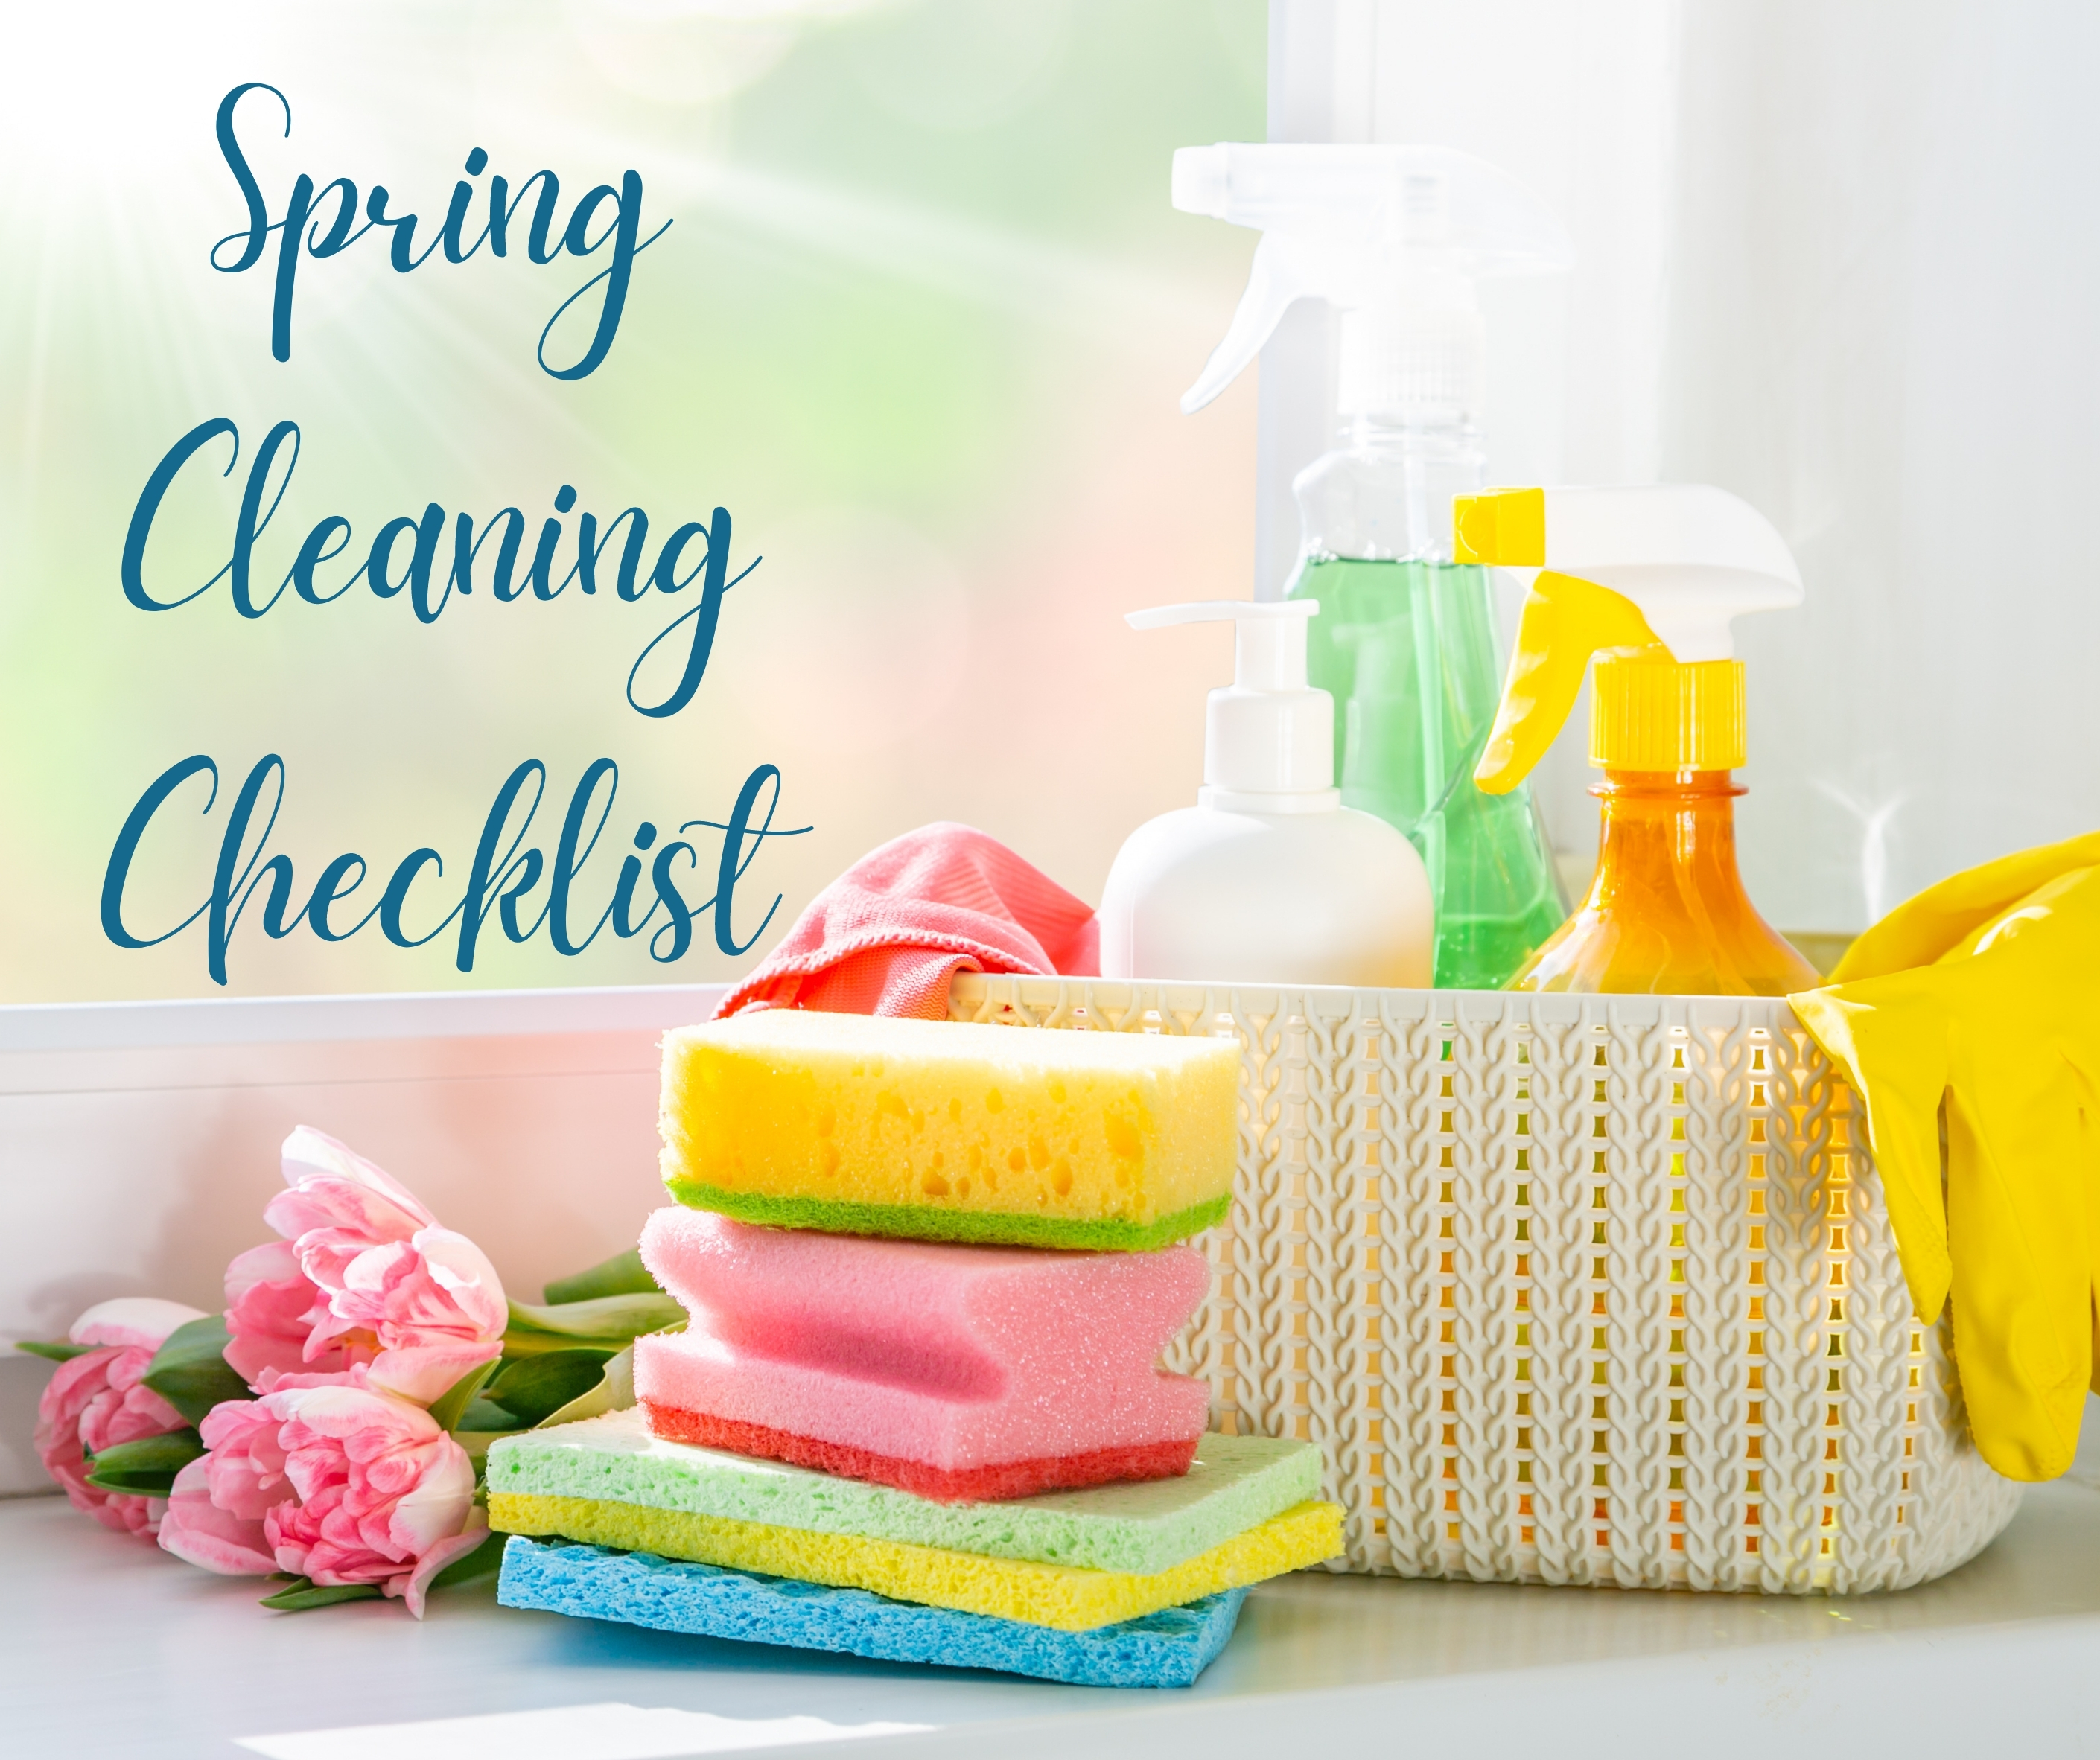 Checklist: Catch Up On Your Spring Cleaning